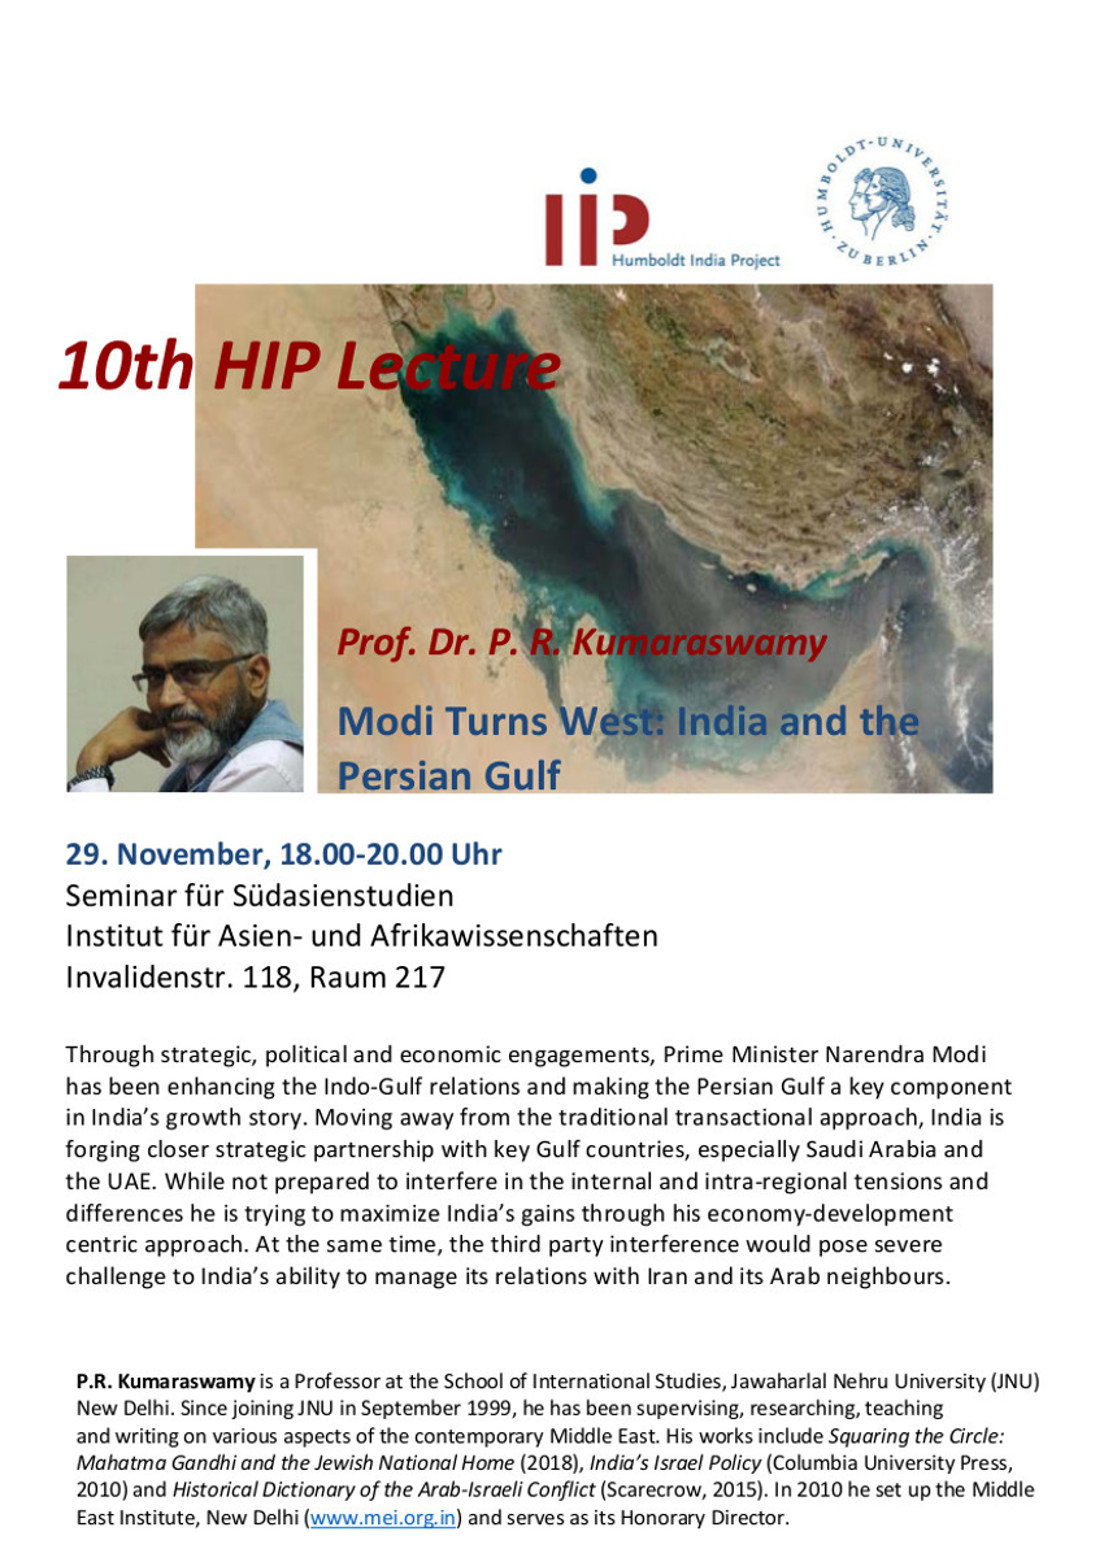 10th HIP Lecture 29th 1November 2018